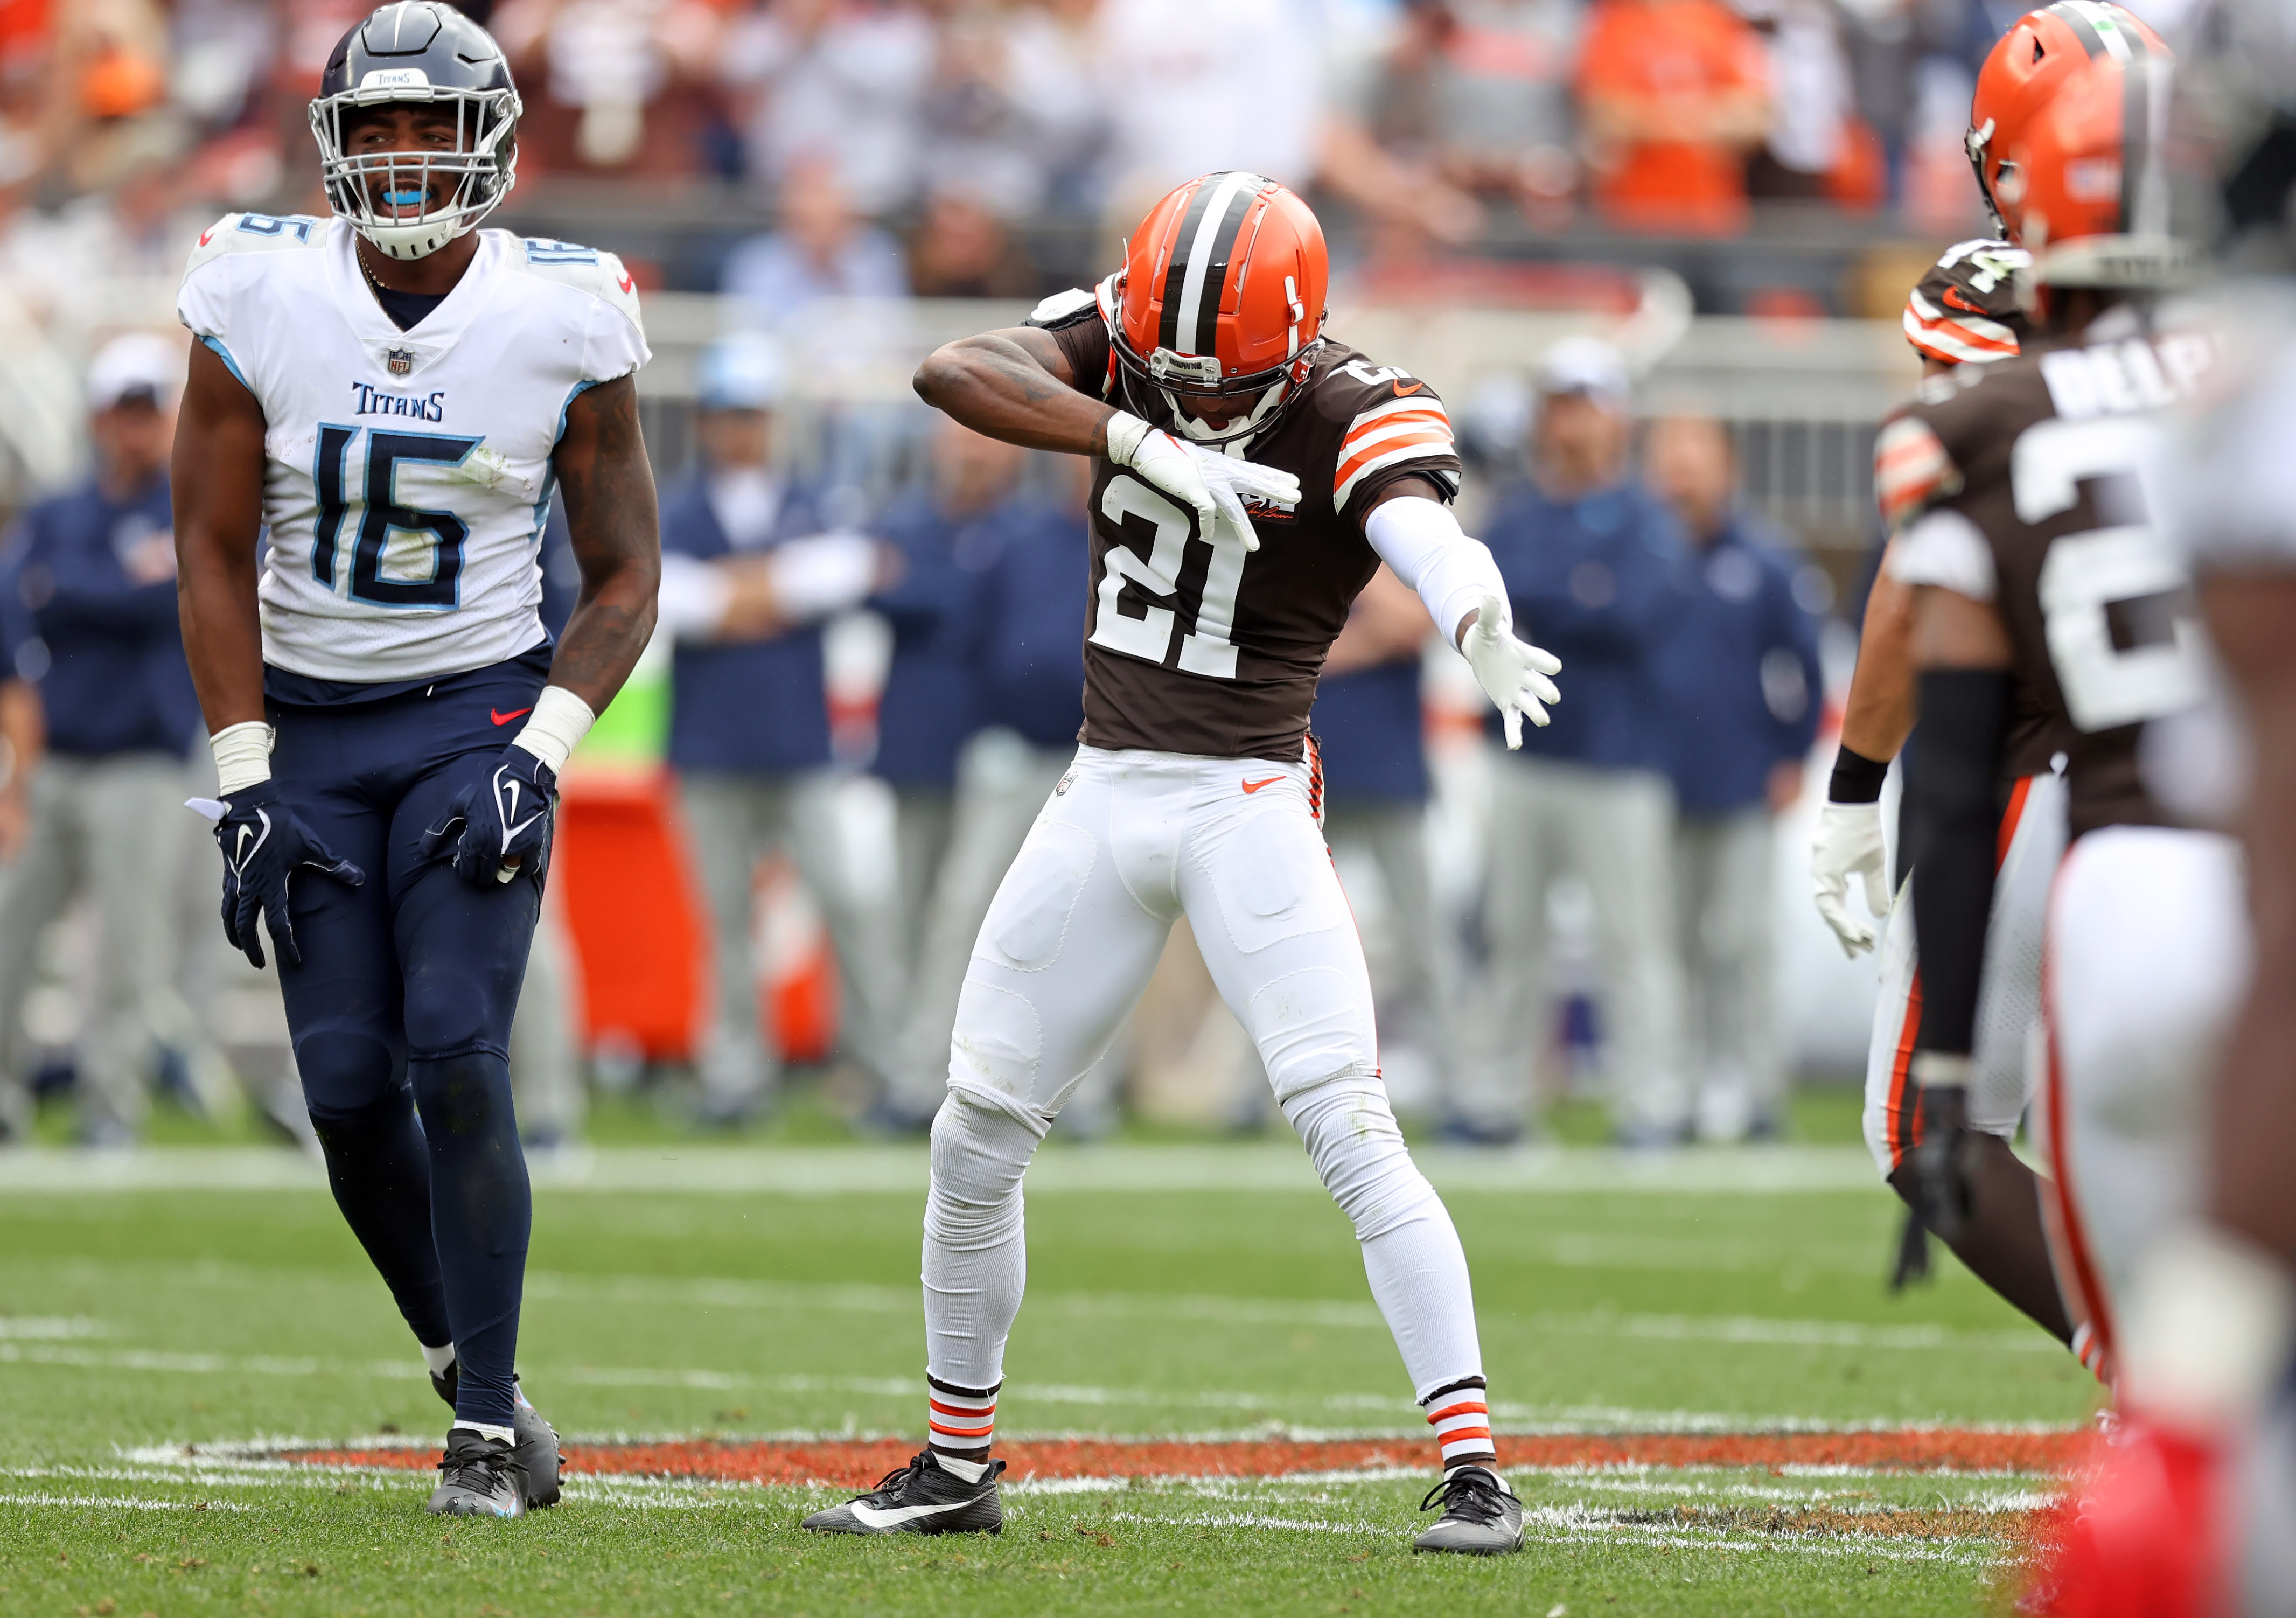 The Browns secondary is dominating and there's still room to grow